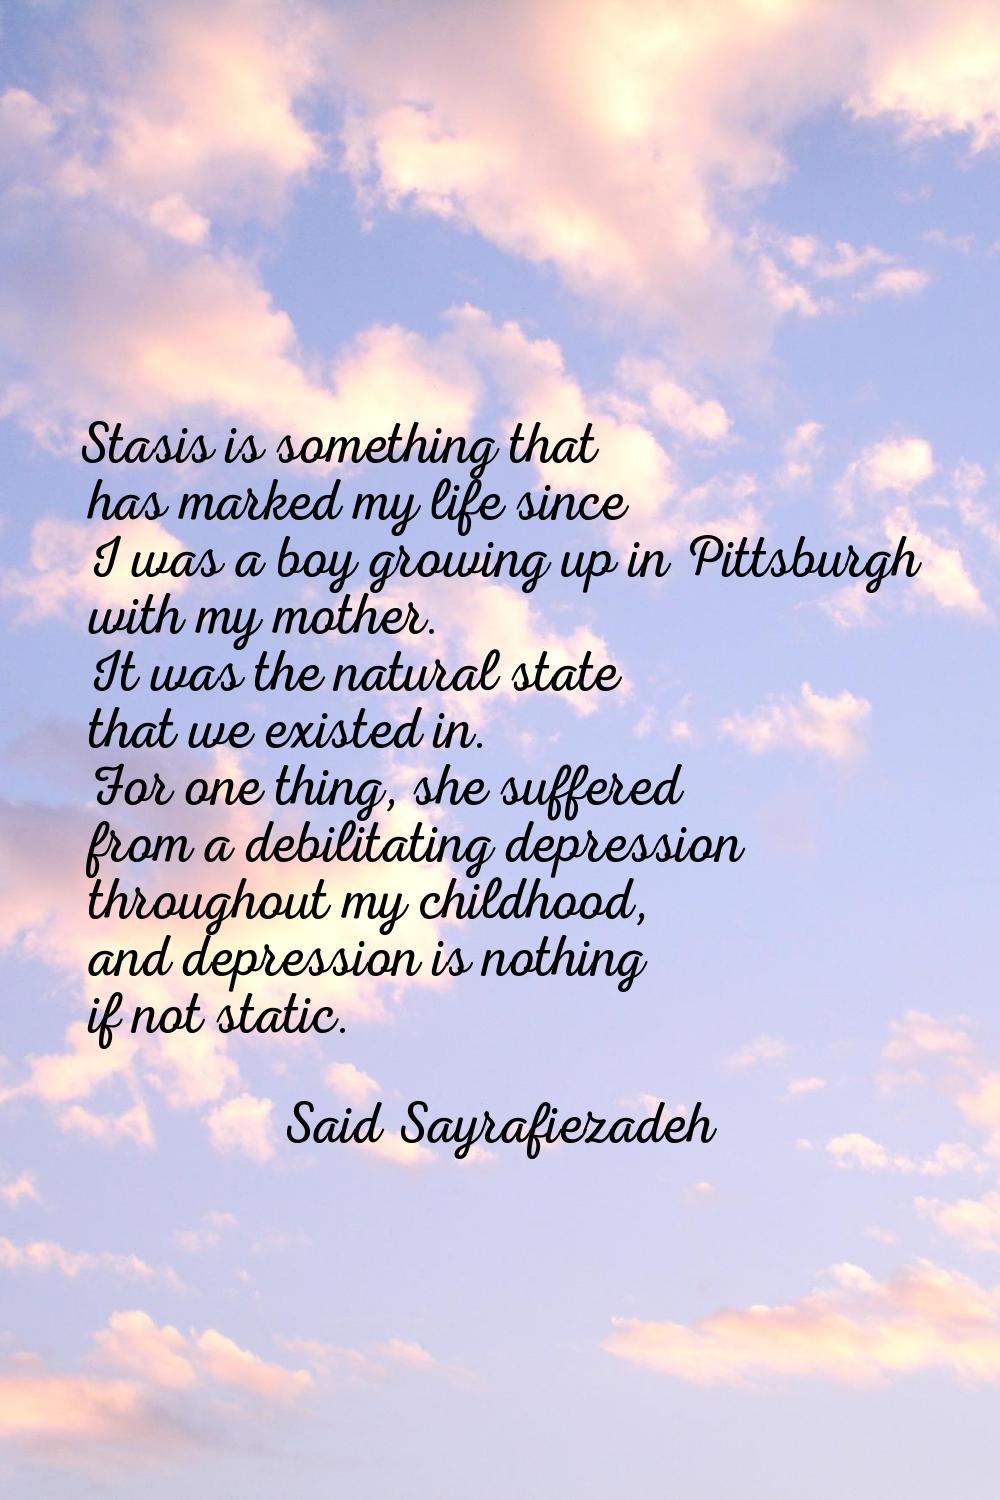 Stasis is something that has marked my life since I was a boy growing up in Pittsburgh with my moth